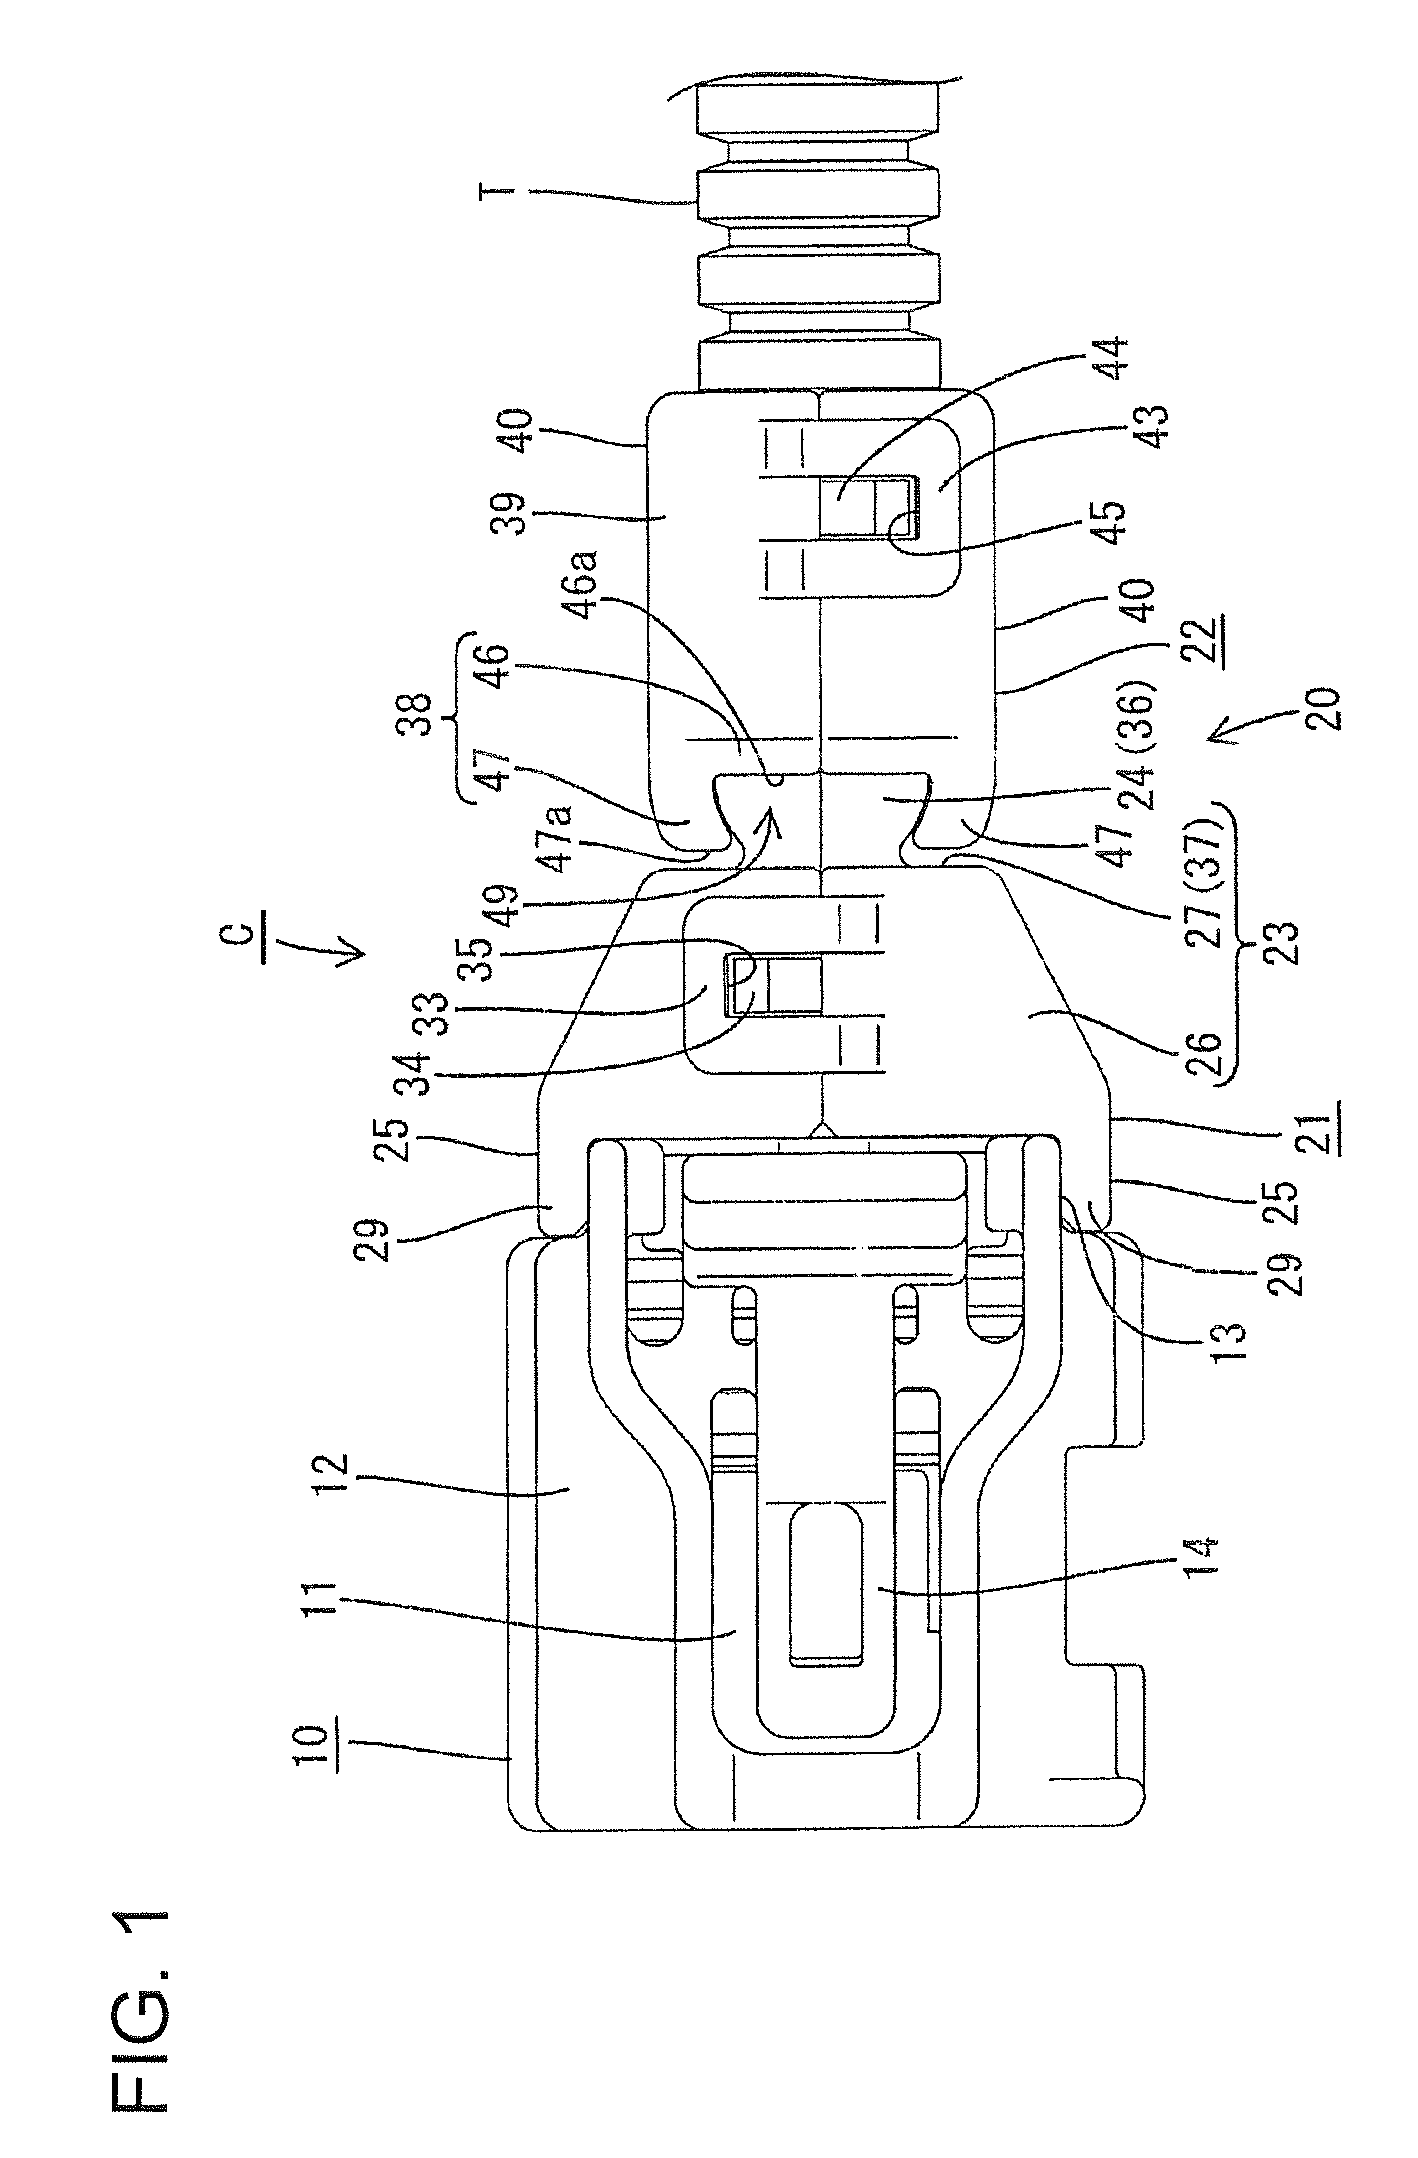 Connector with a wire cover for altering a pull-out direction of wires